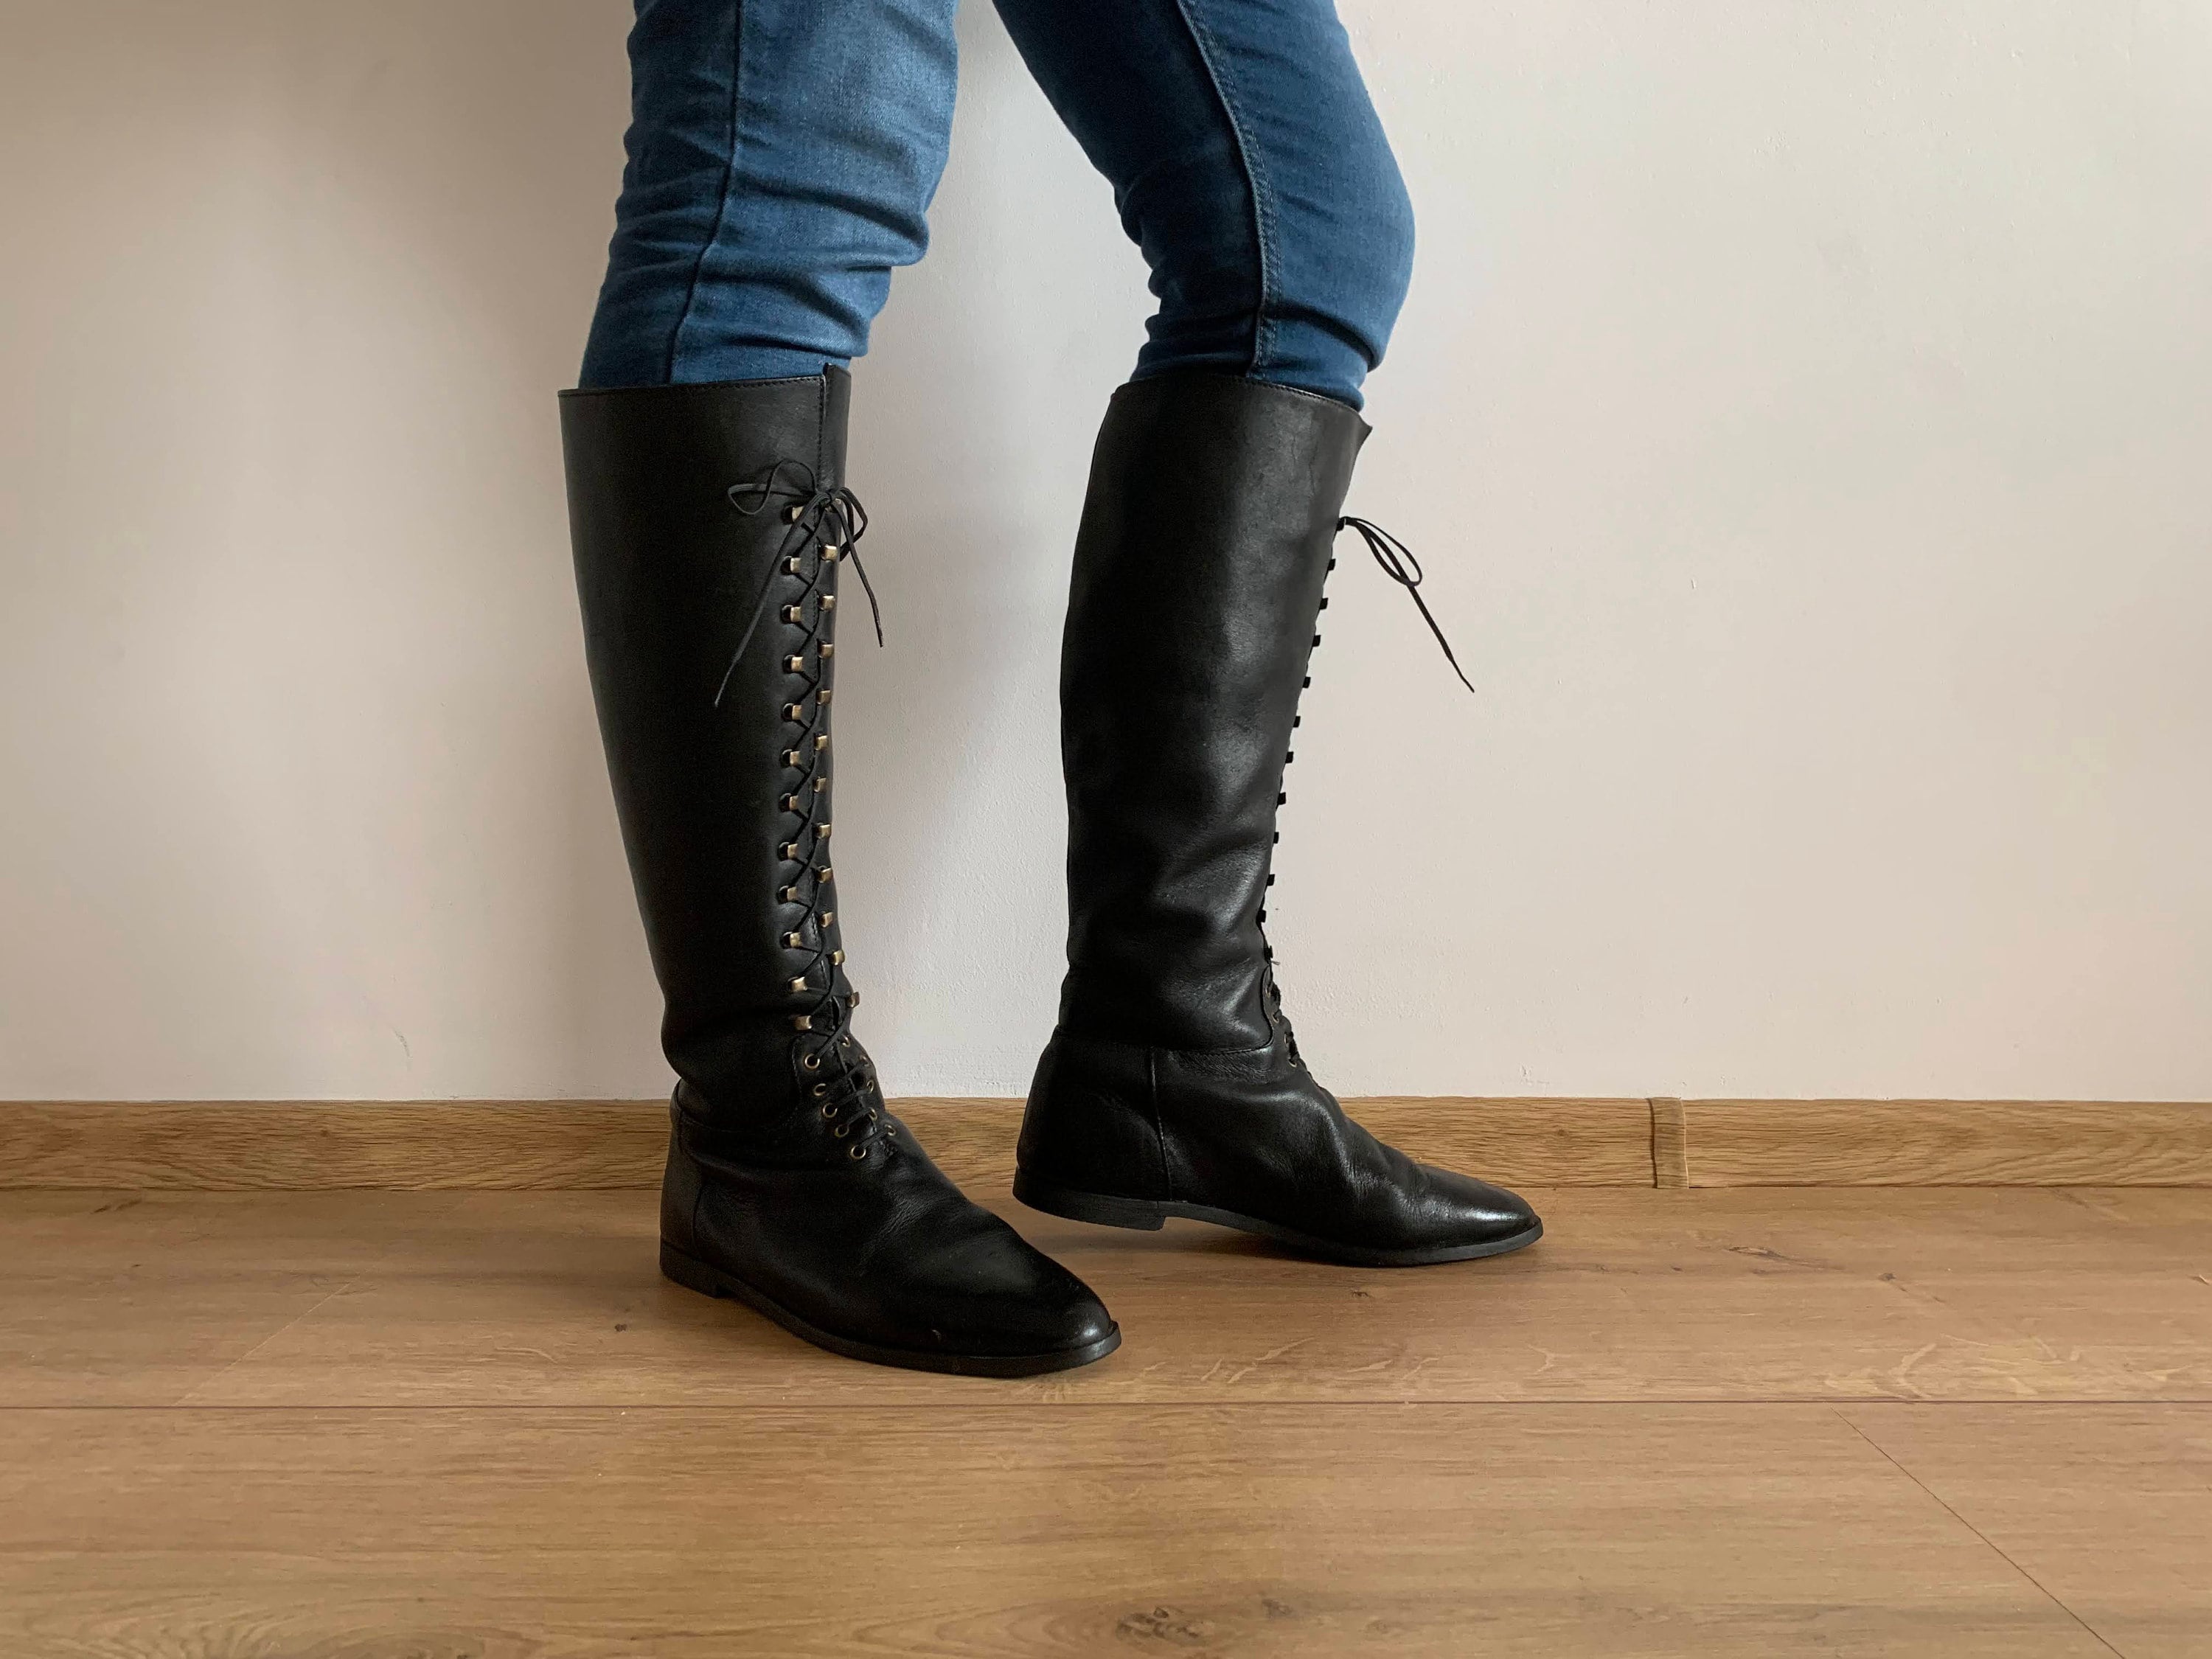 Vintage Tall Riding Boots for Women Size 38 UK 5, Knee High Black Lace up  Boots, Distressed Leather Equestrian Boots, Flat Sole Boots 